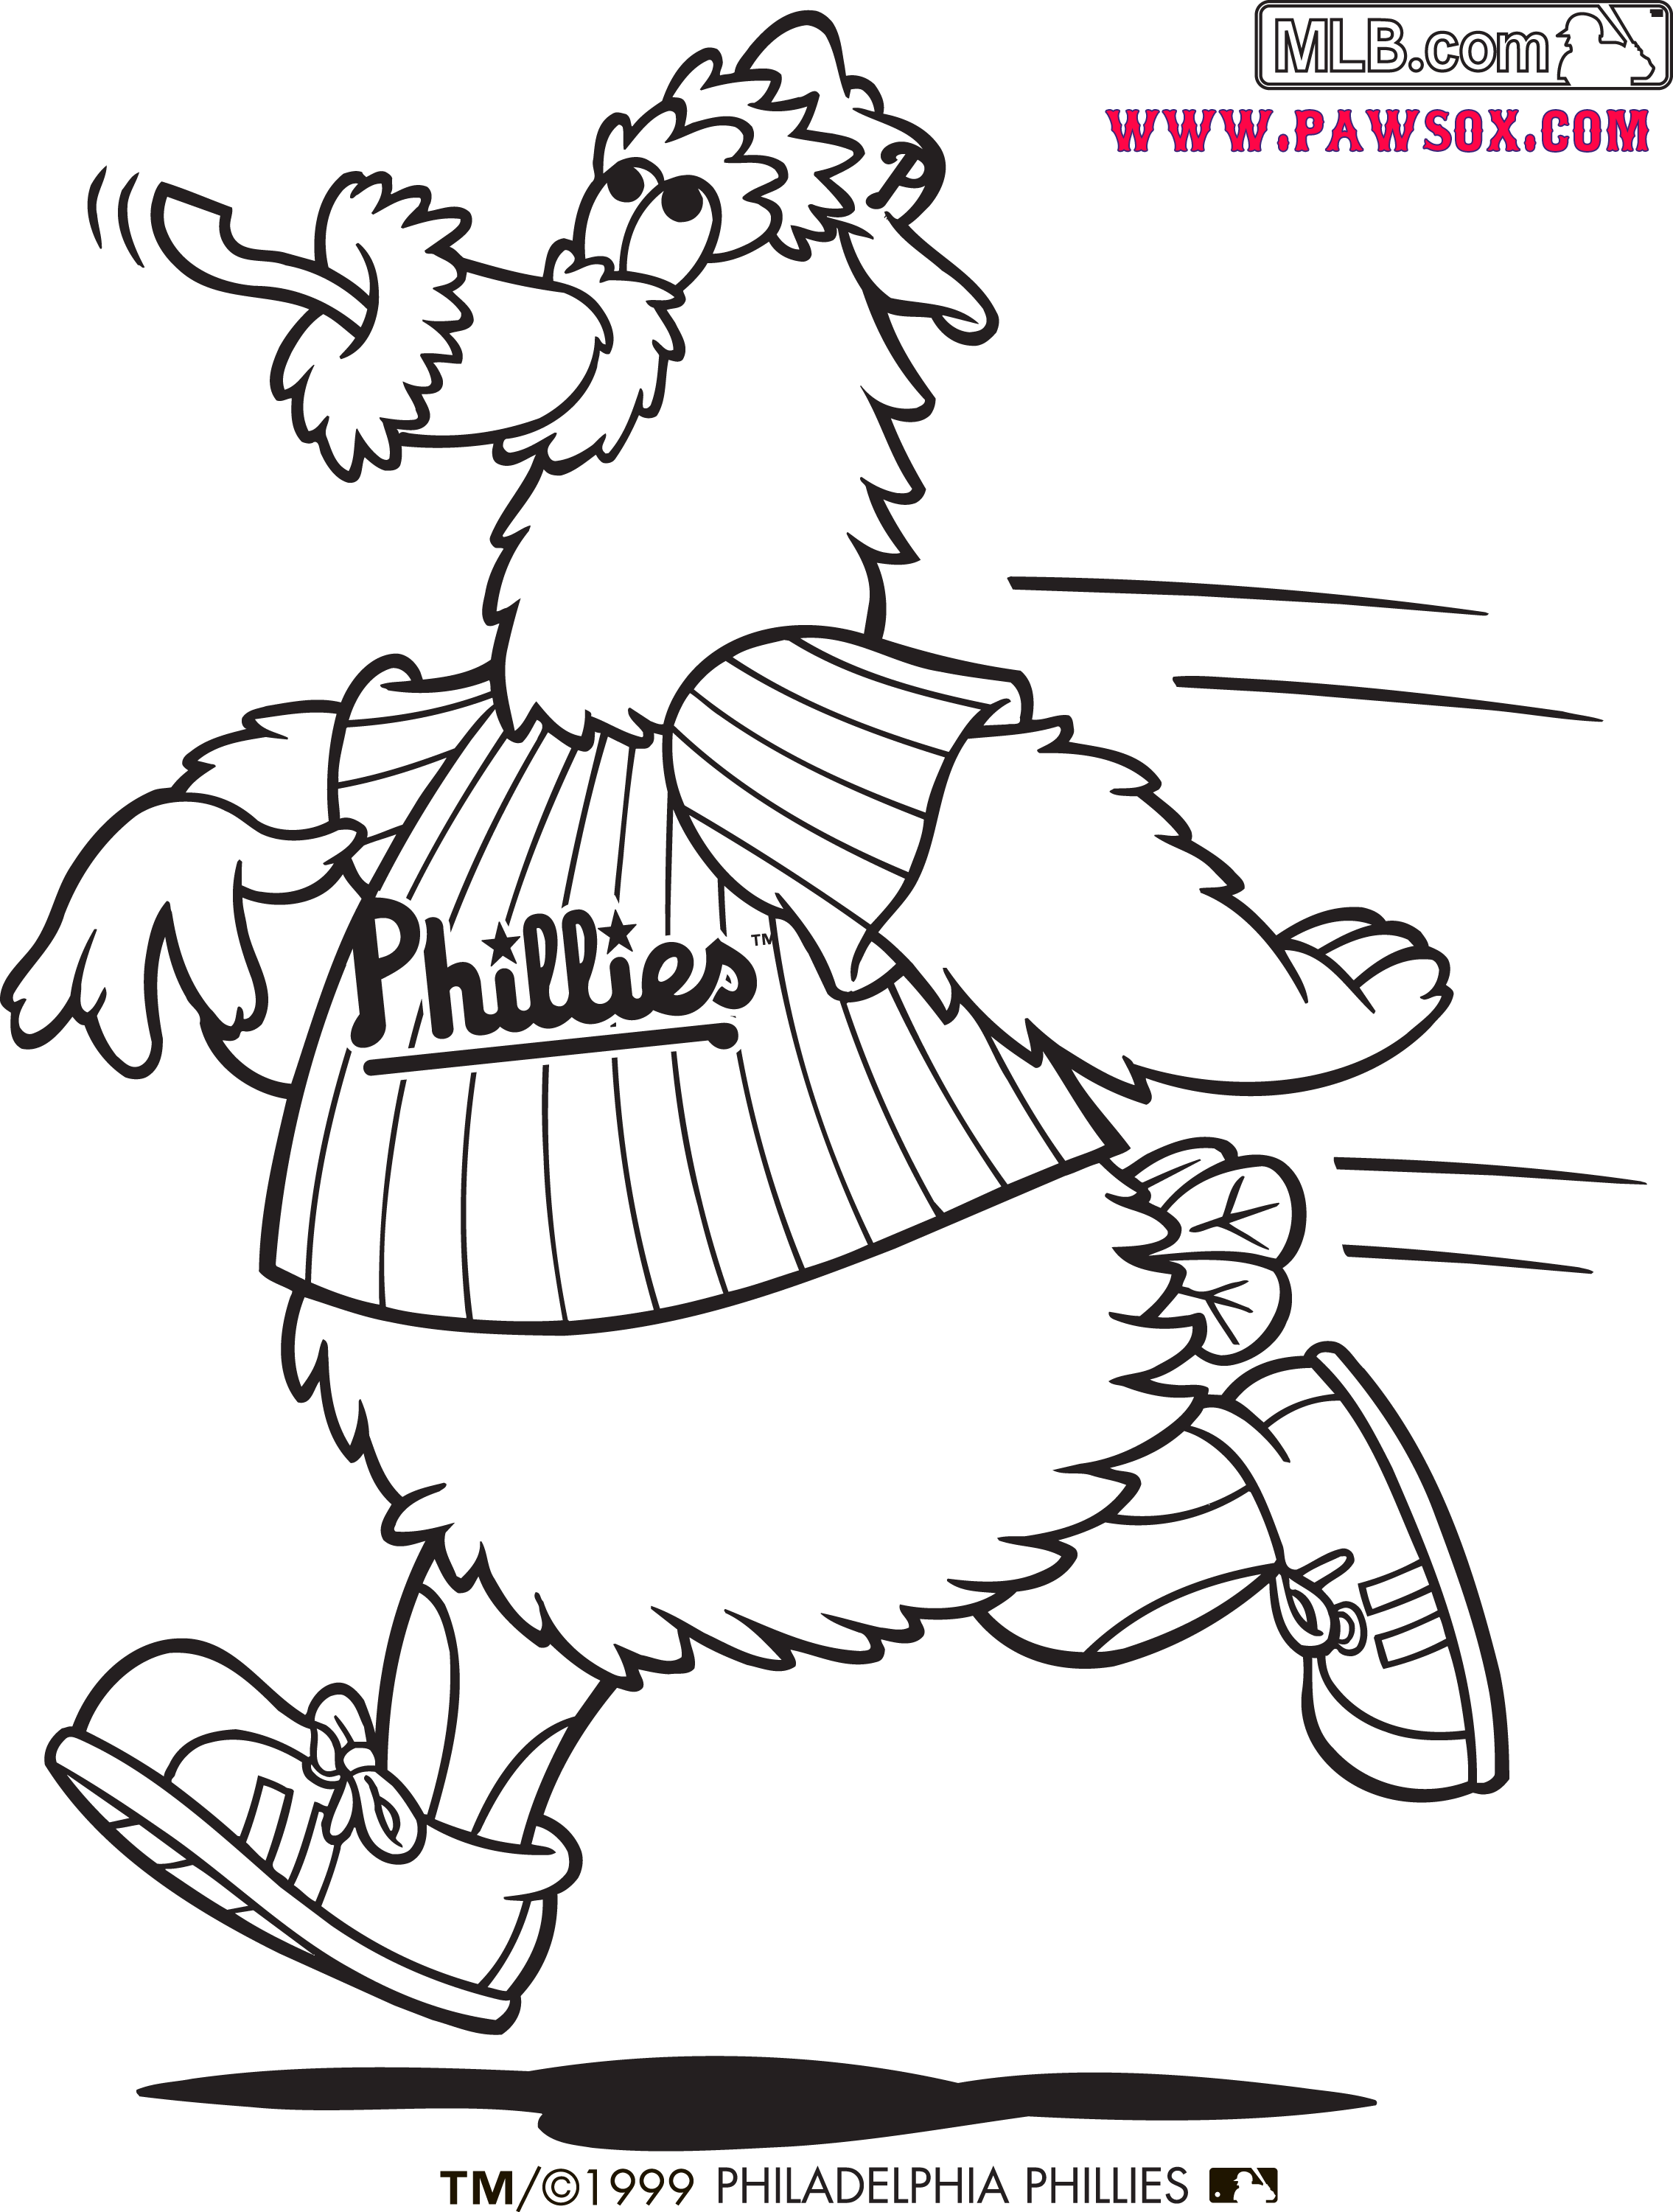 Phillies Phanatic Coloring Page - Coloring Home